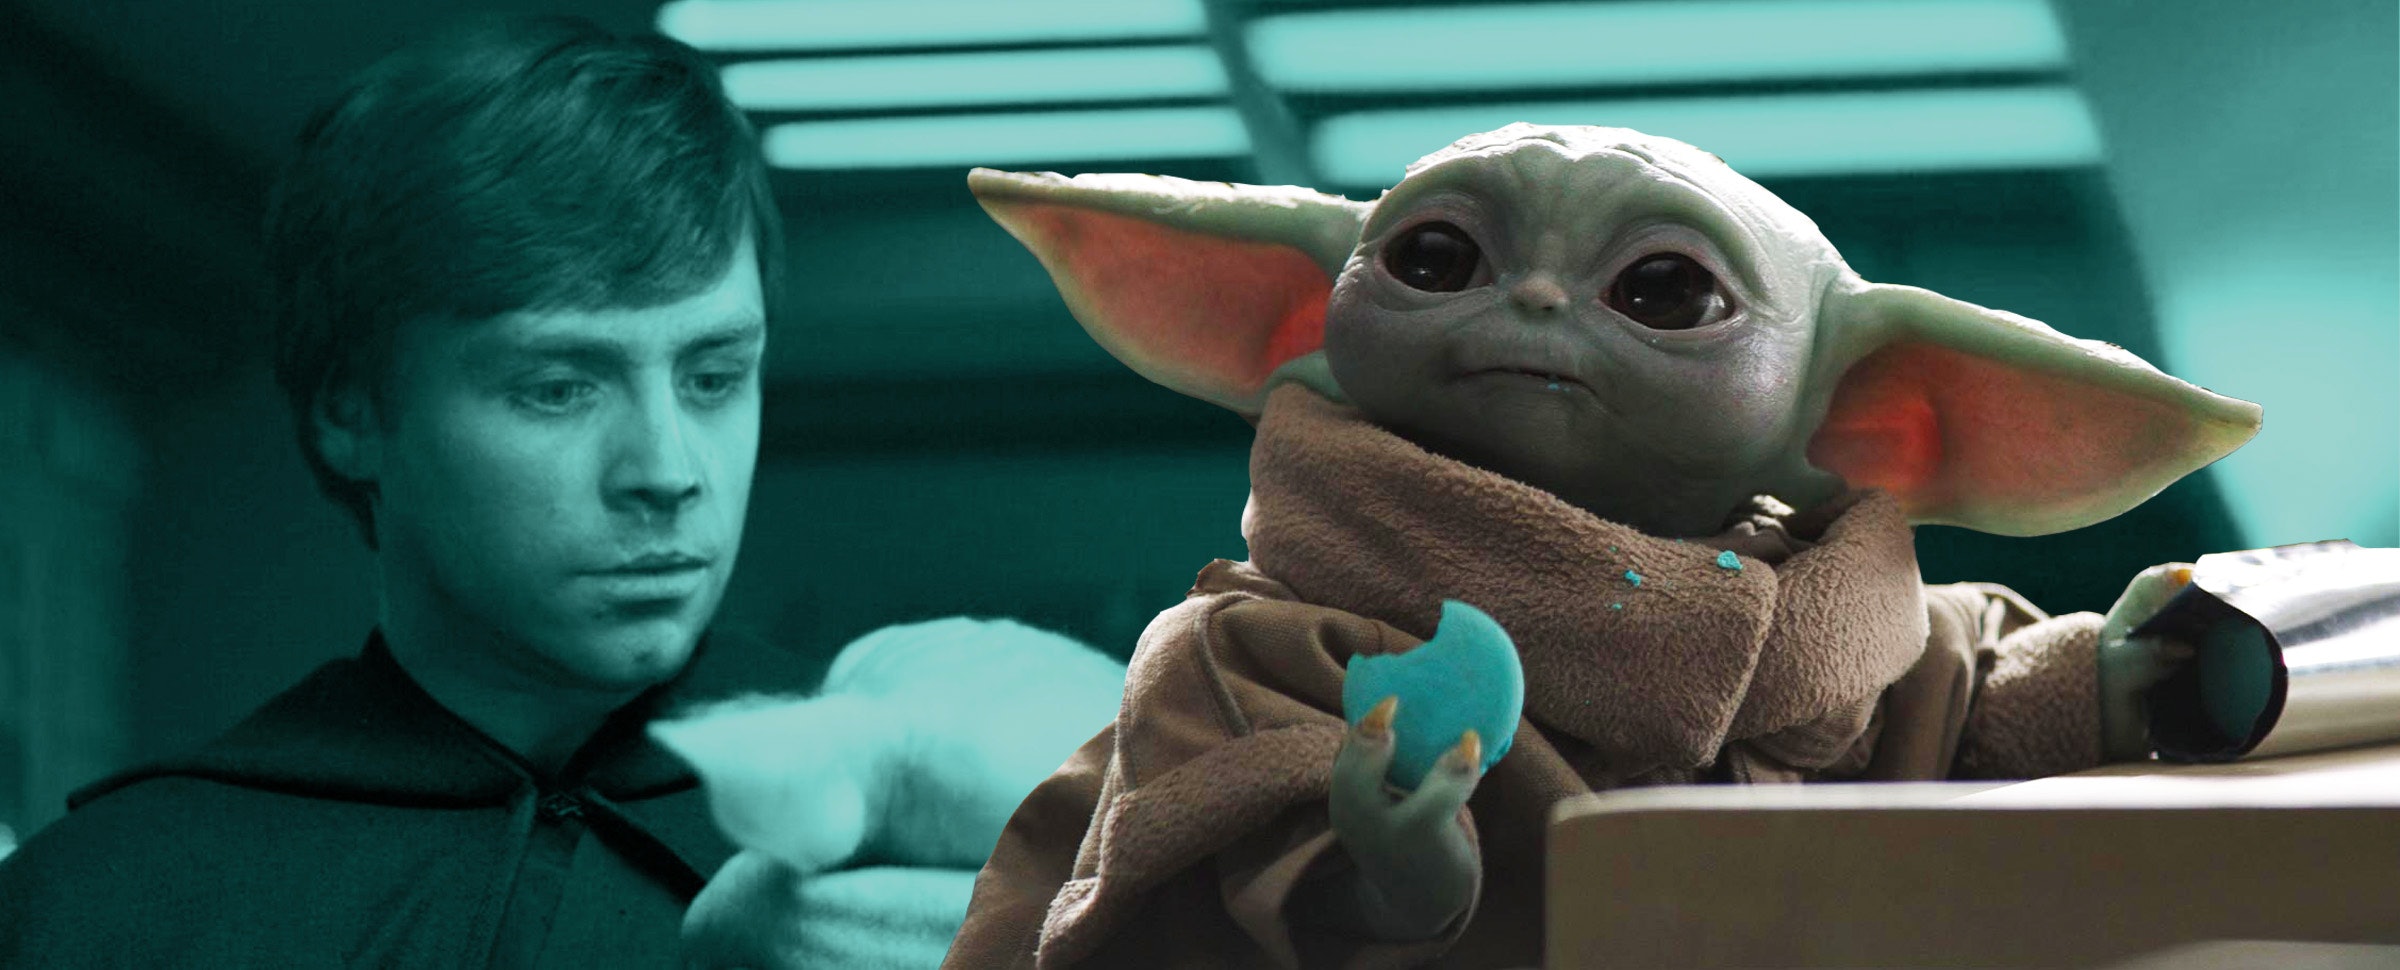 Is Yoda the Child's Father in 'The Mandalorian'? - How Baby Yoda Has Parents